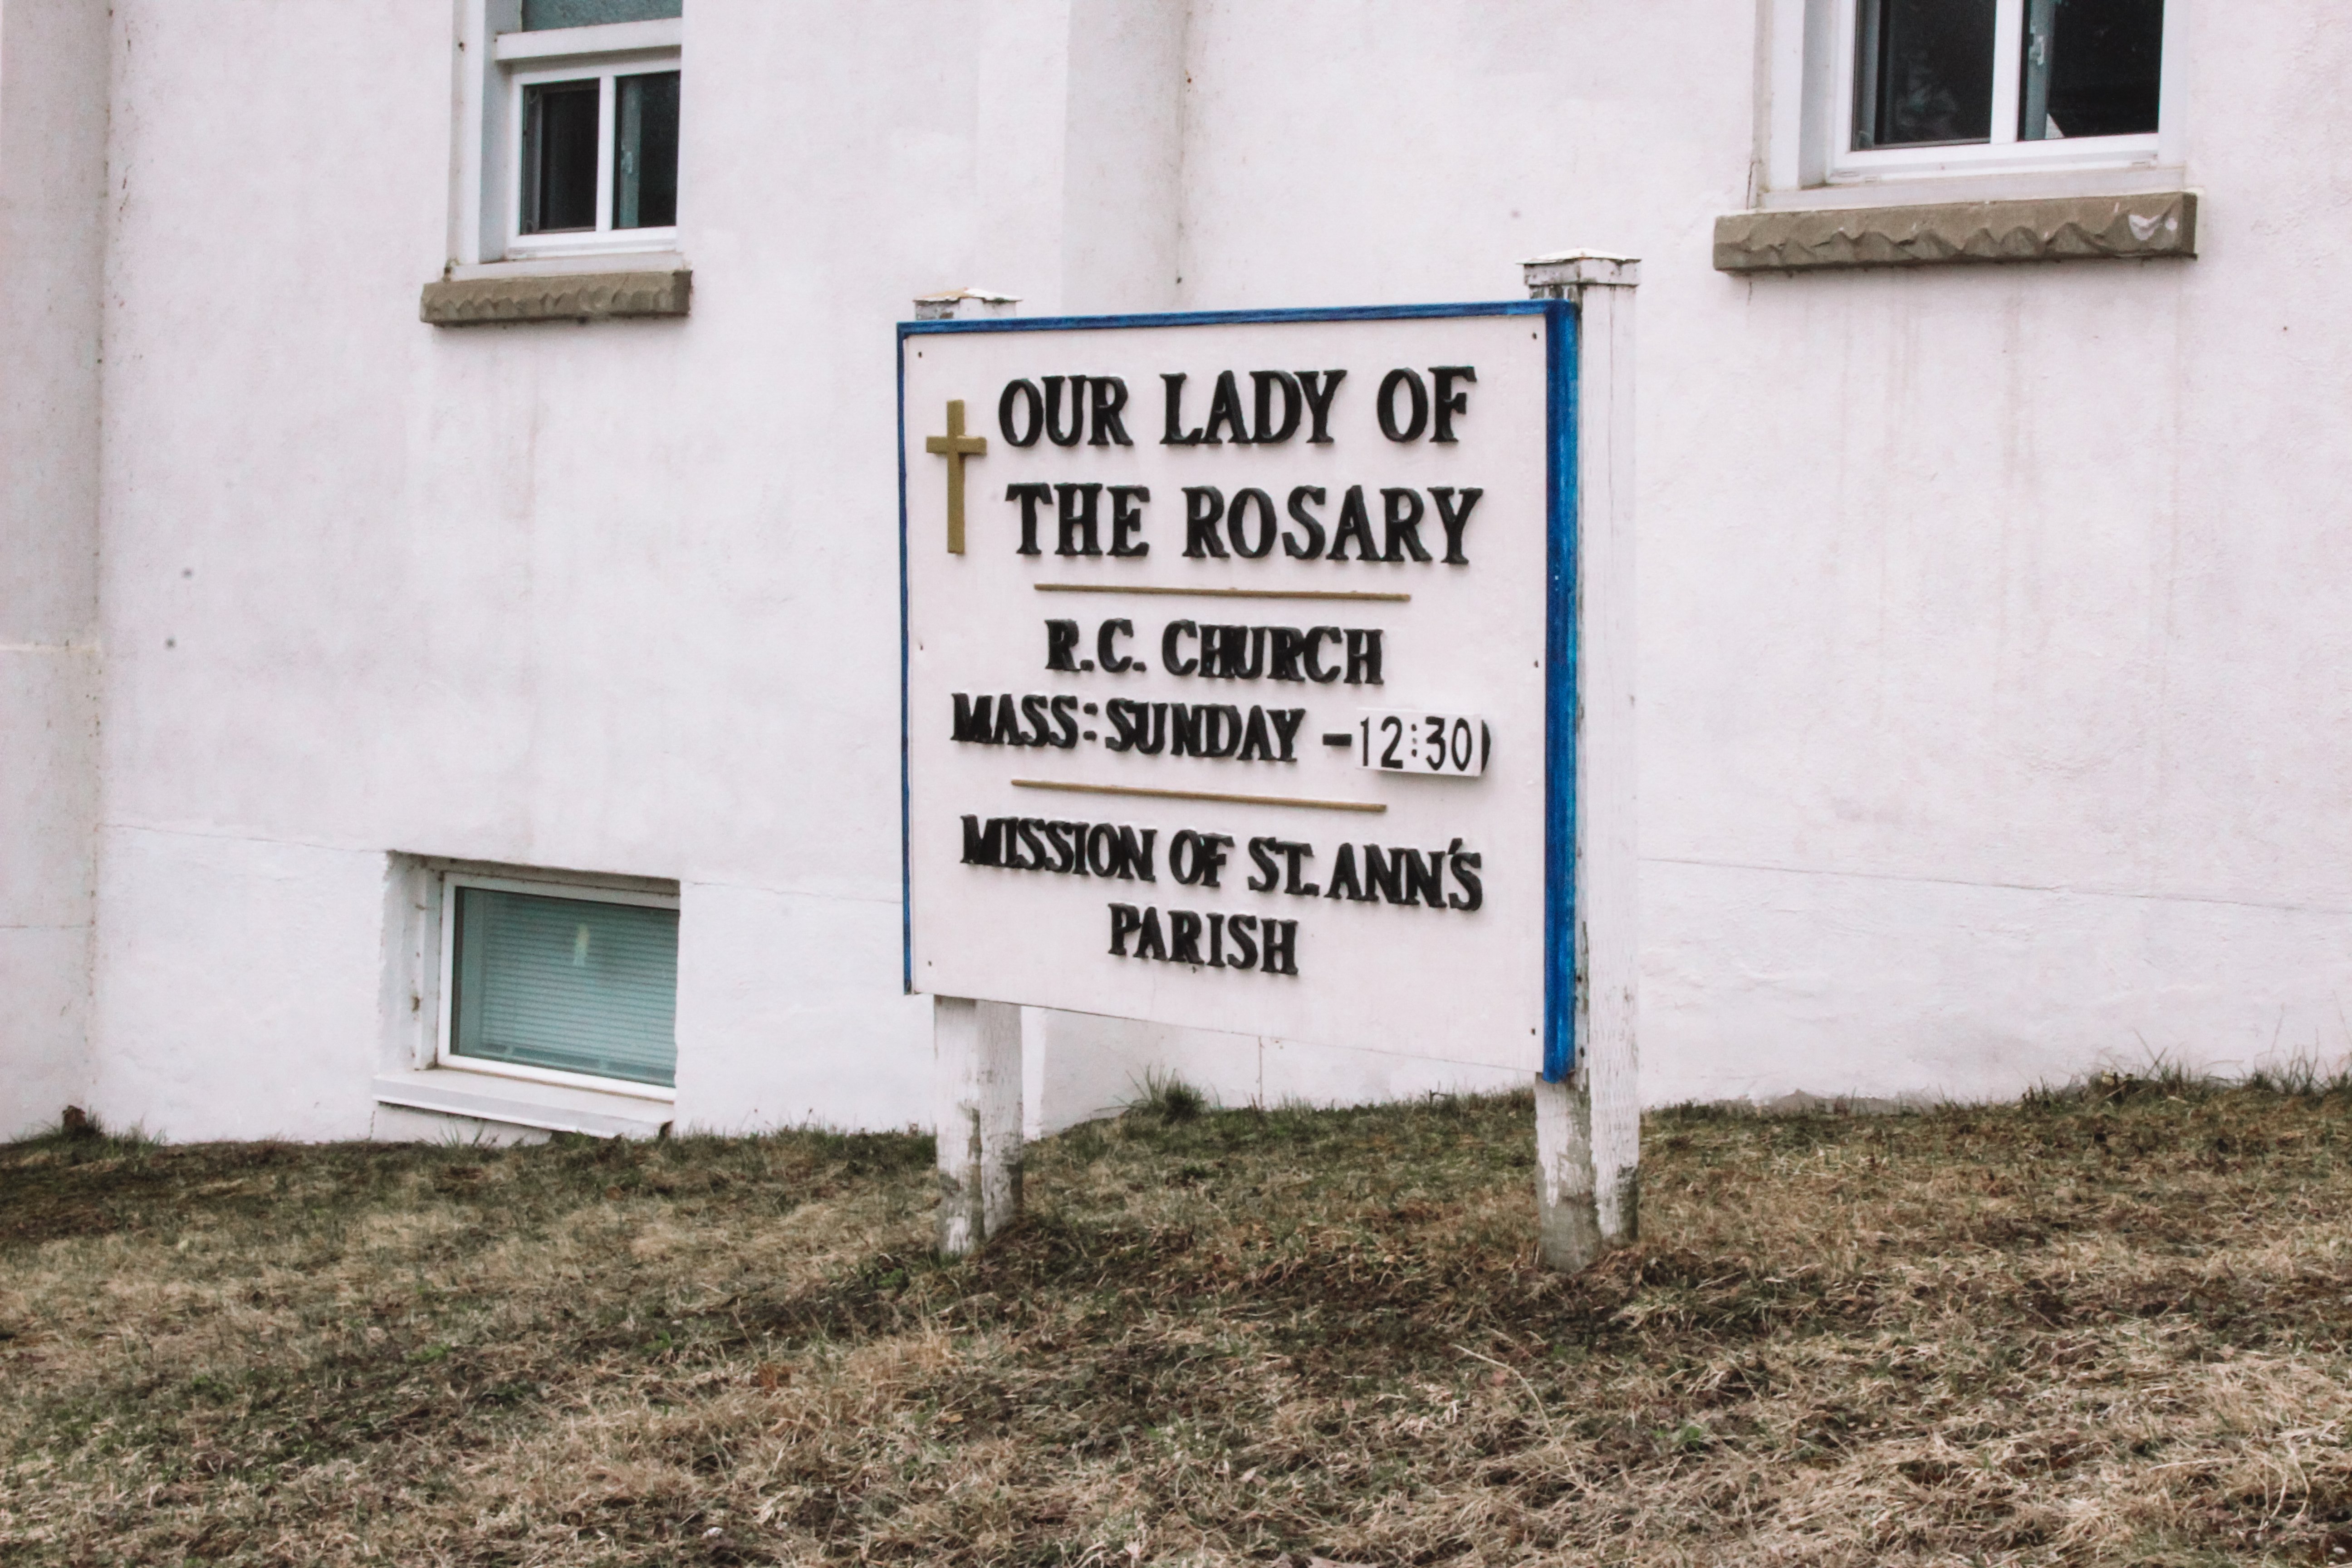 Our Lady of the Rosary Sign: "Our Lady of the Rosary-RC Church Mass Sunday 12:30pm-Mission of St Ann's Chruch"